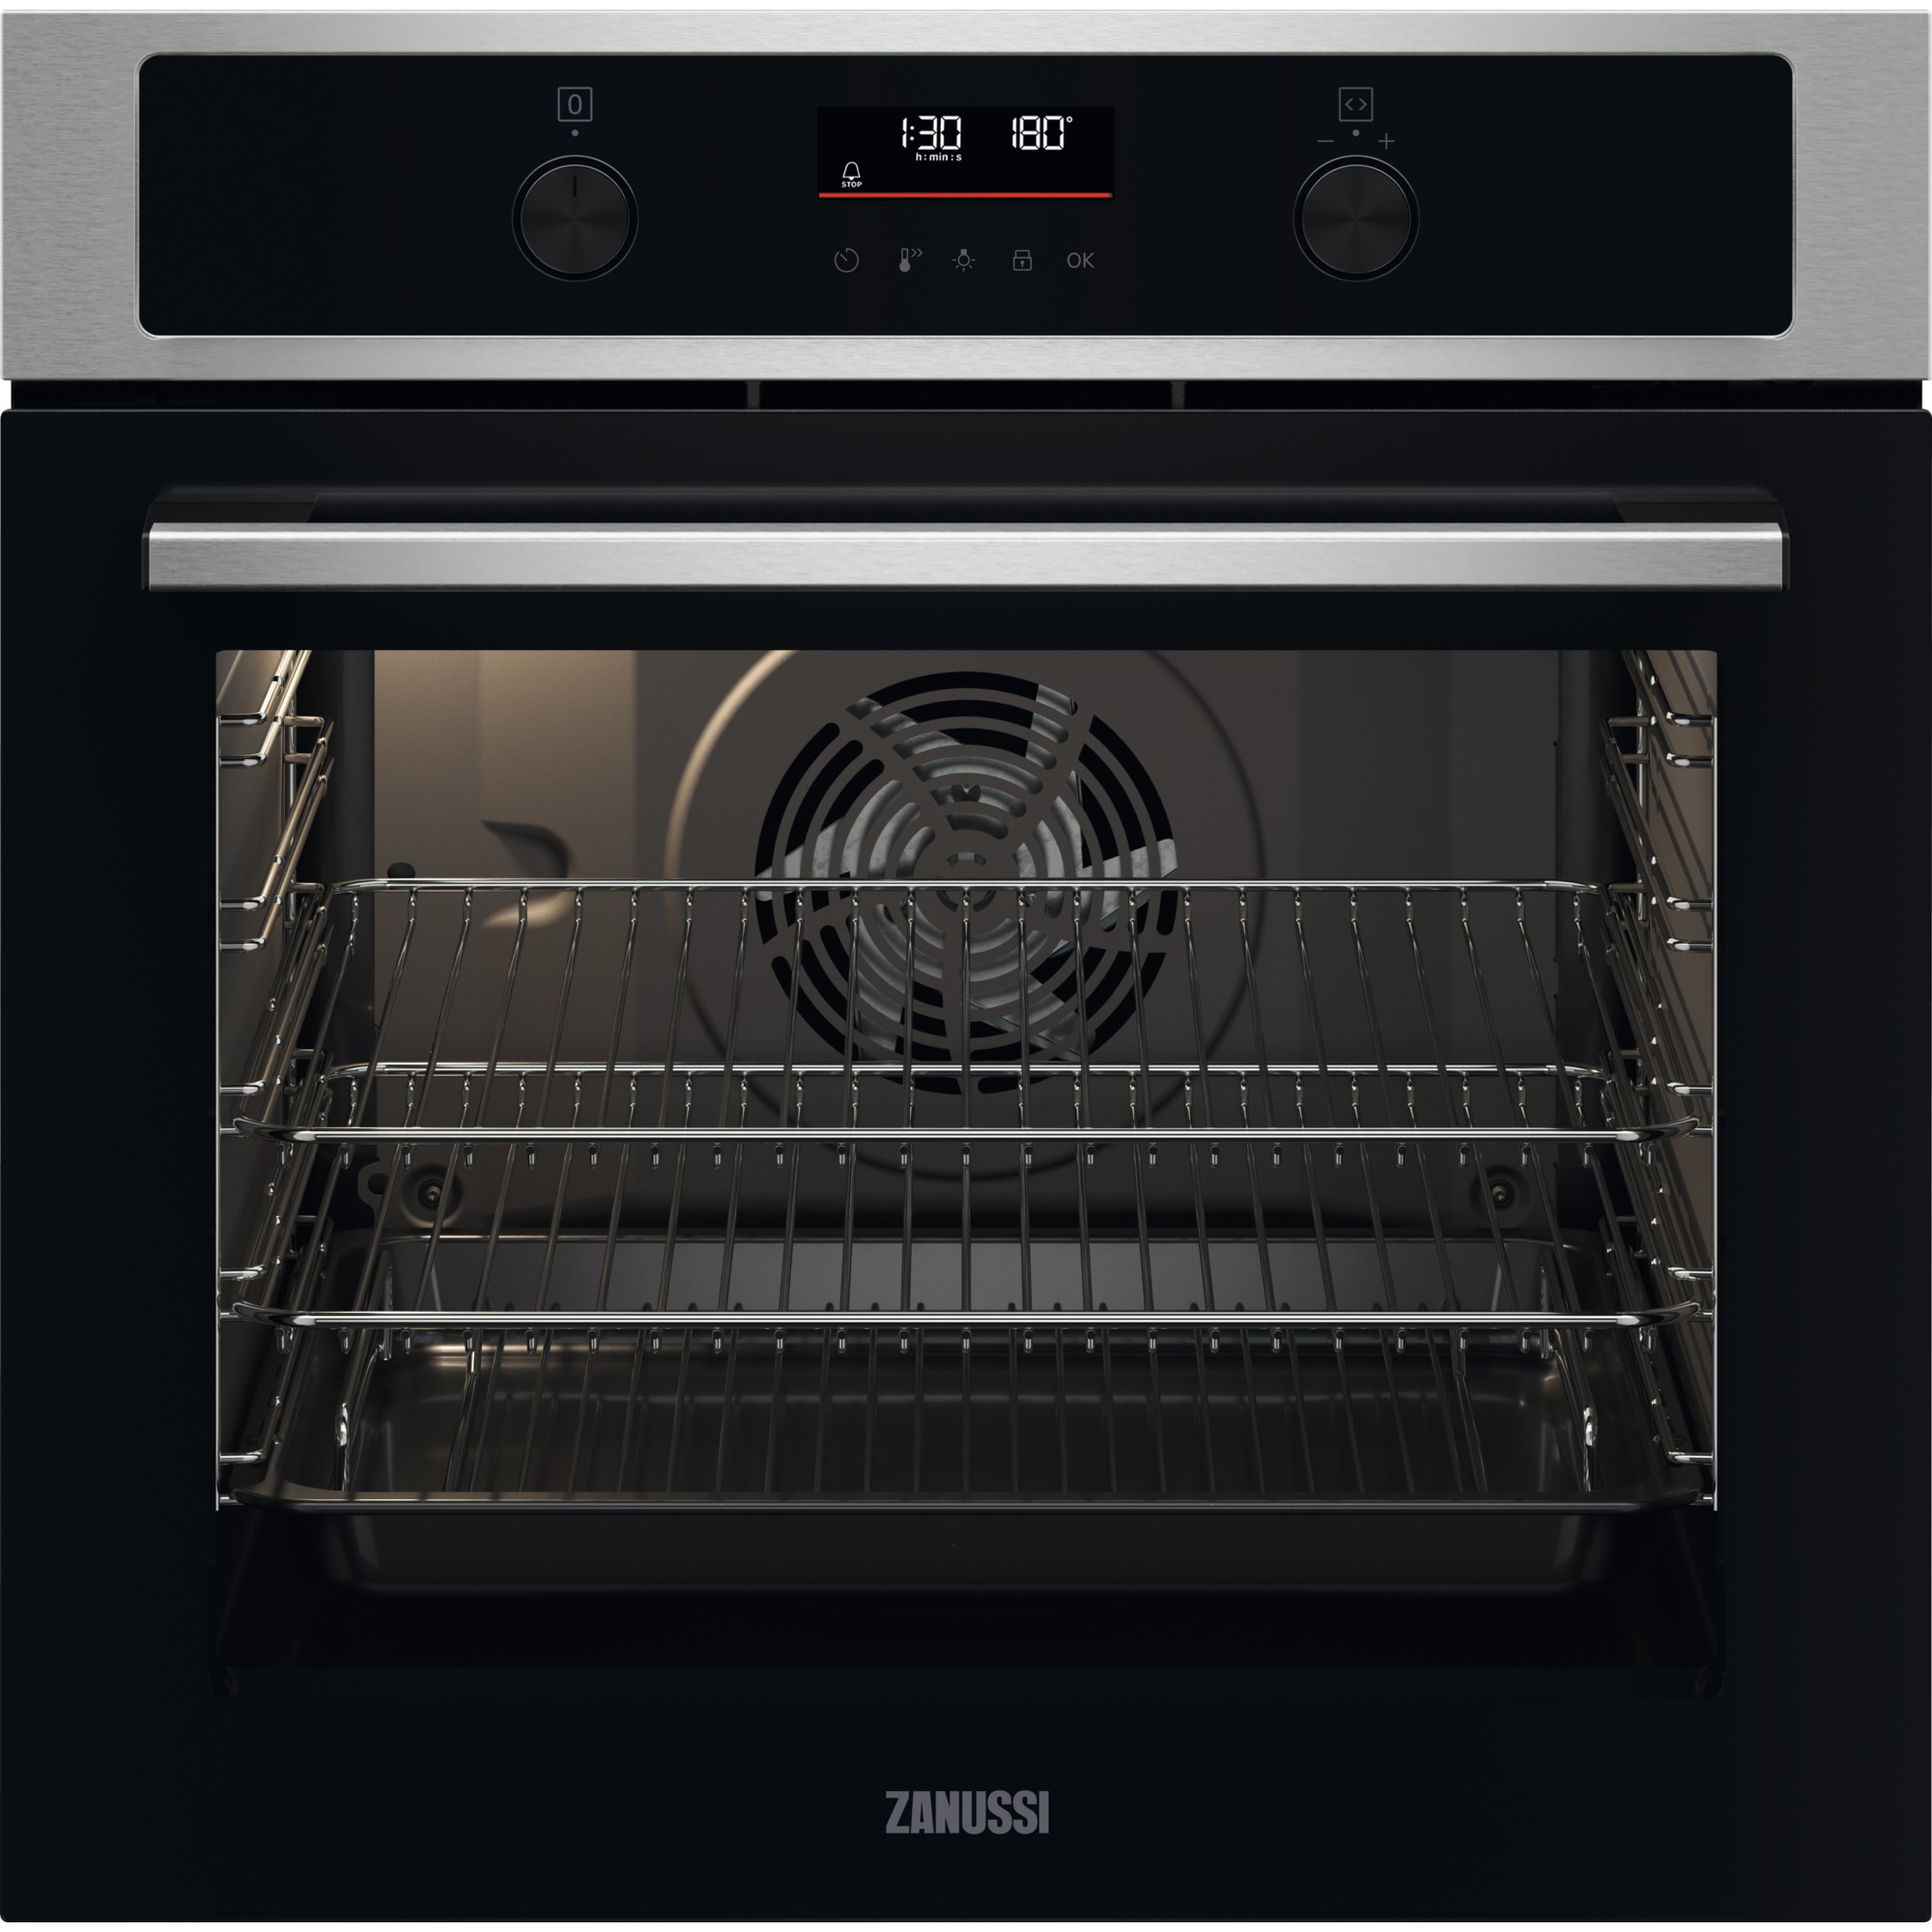 Zanussi Built-in Single Electric Oven with Fan SteamBake